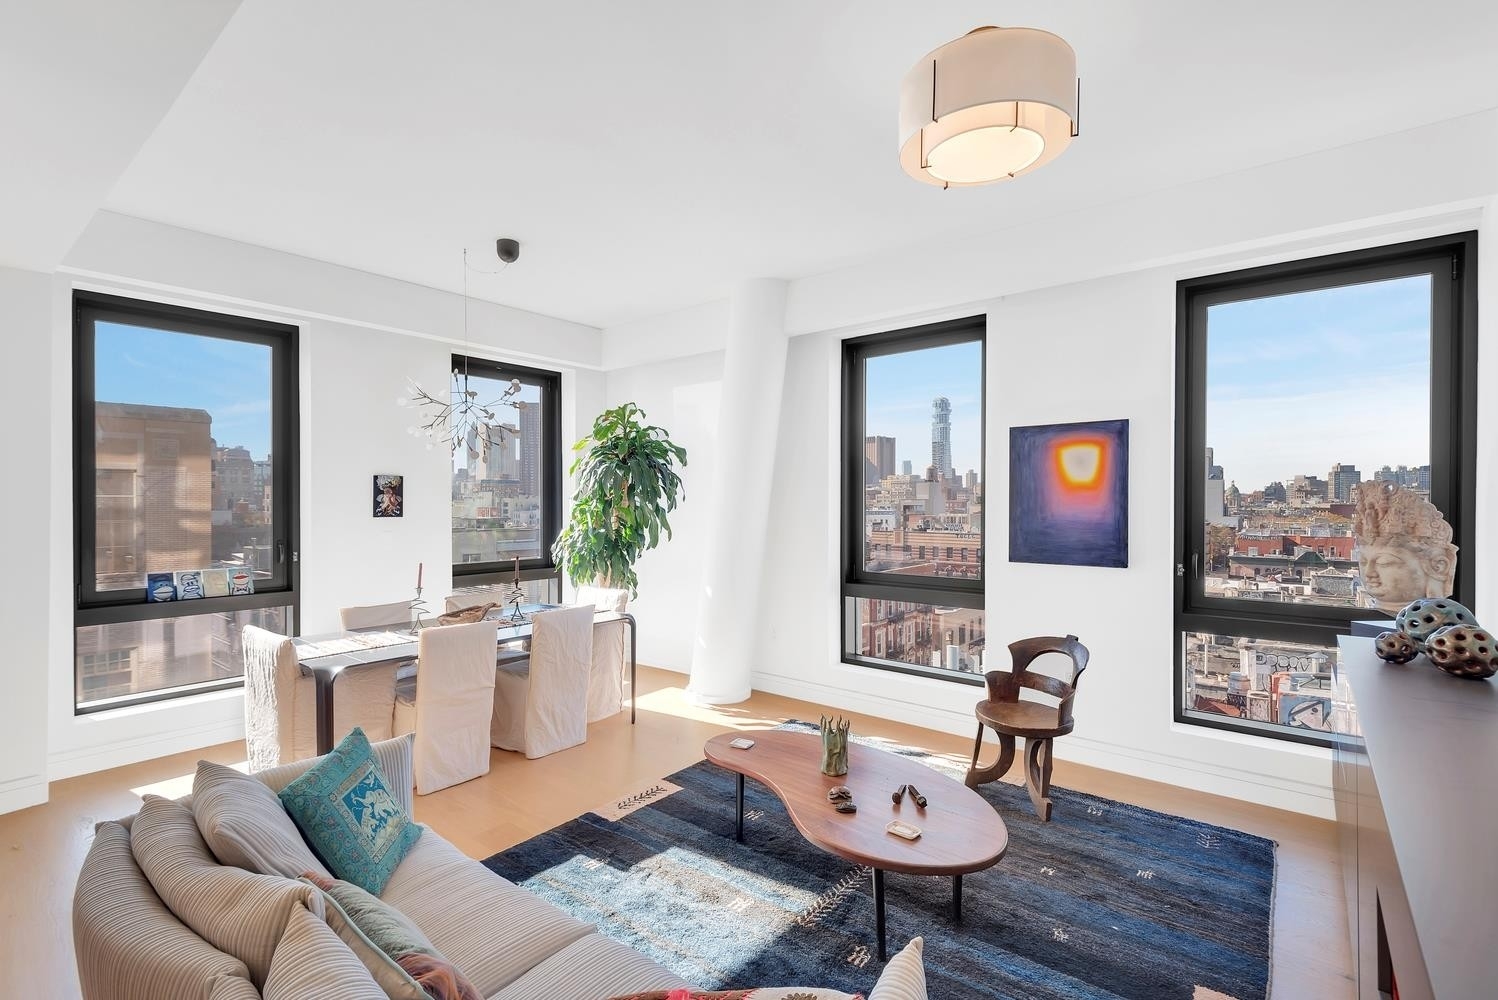 Condominium for Sale at Essex Crossing, 242 BROOME ST, 9C Lower East Side, New York, NY 10002